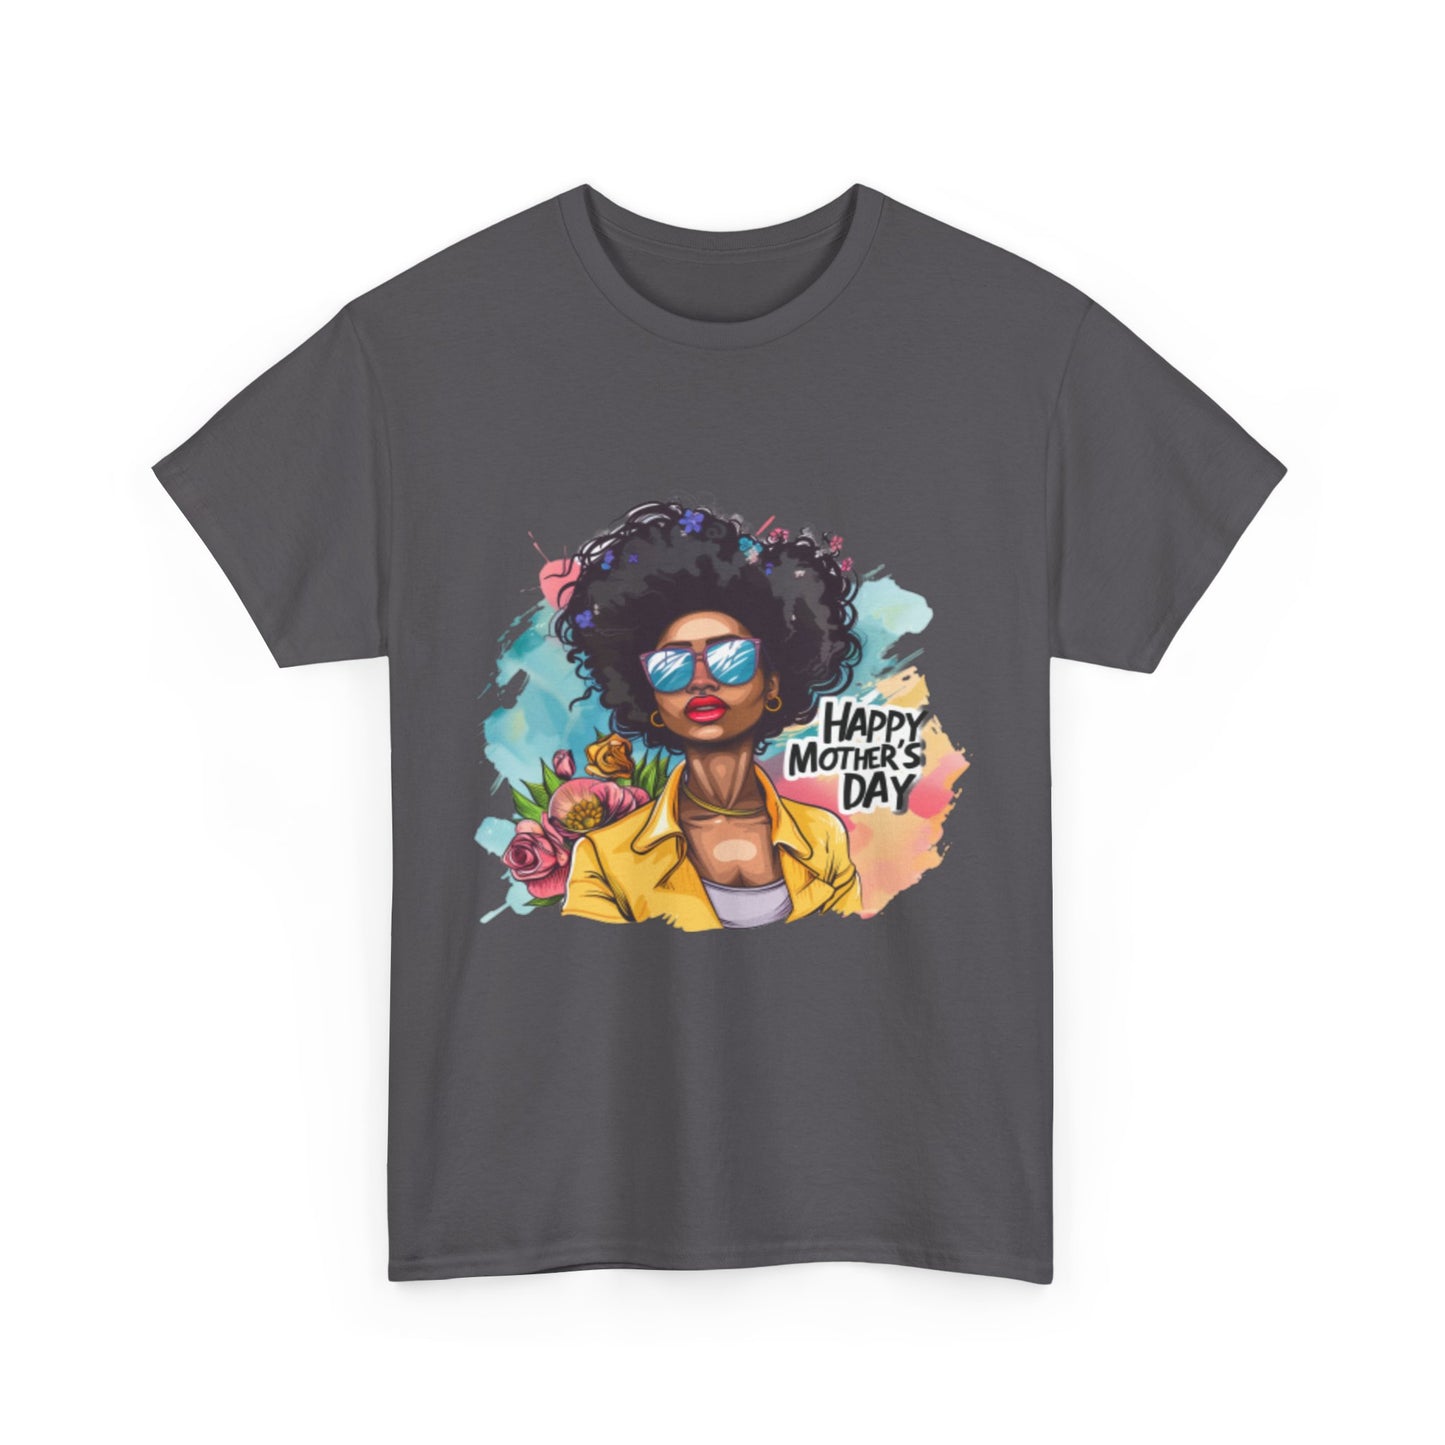 Happy Mother's Day African American Mom Graphic Unisex Heavy Cotton Tee Cotton Funny Humorous Graphic Soft Premium Unisex Men Women Charcoal T-shirt Birthday Gift-18